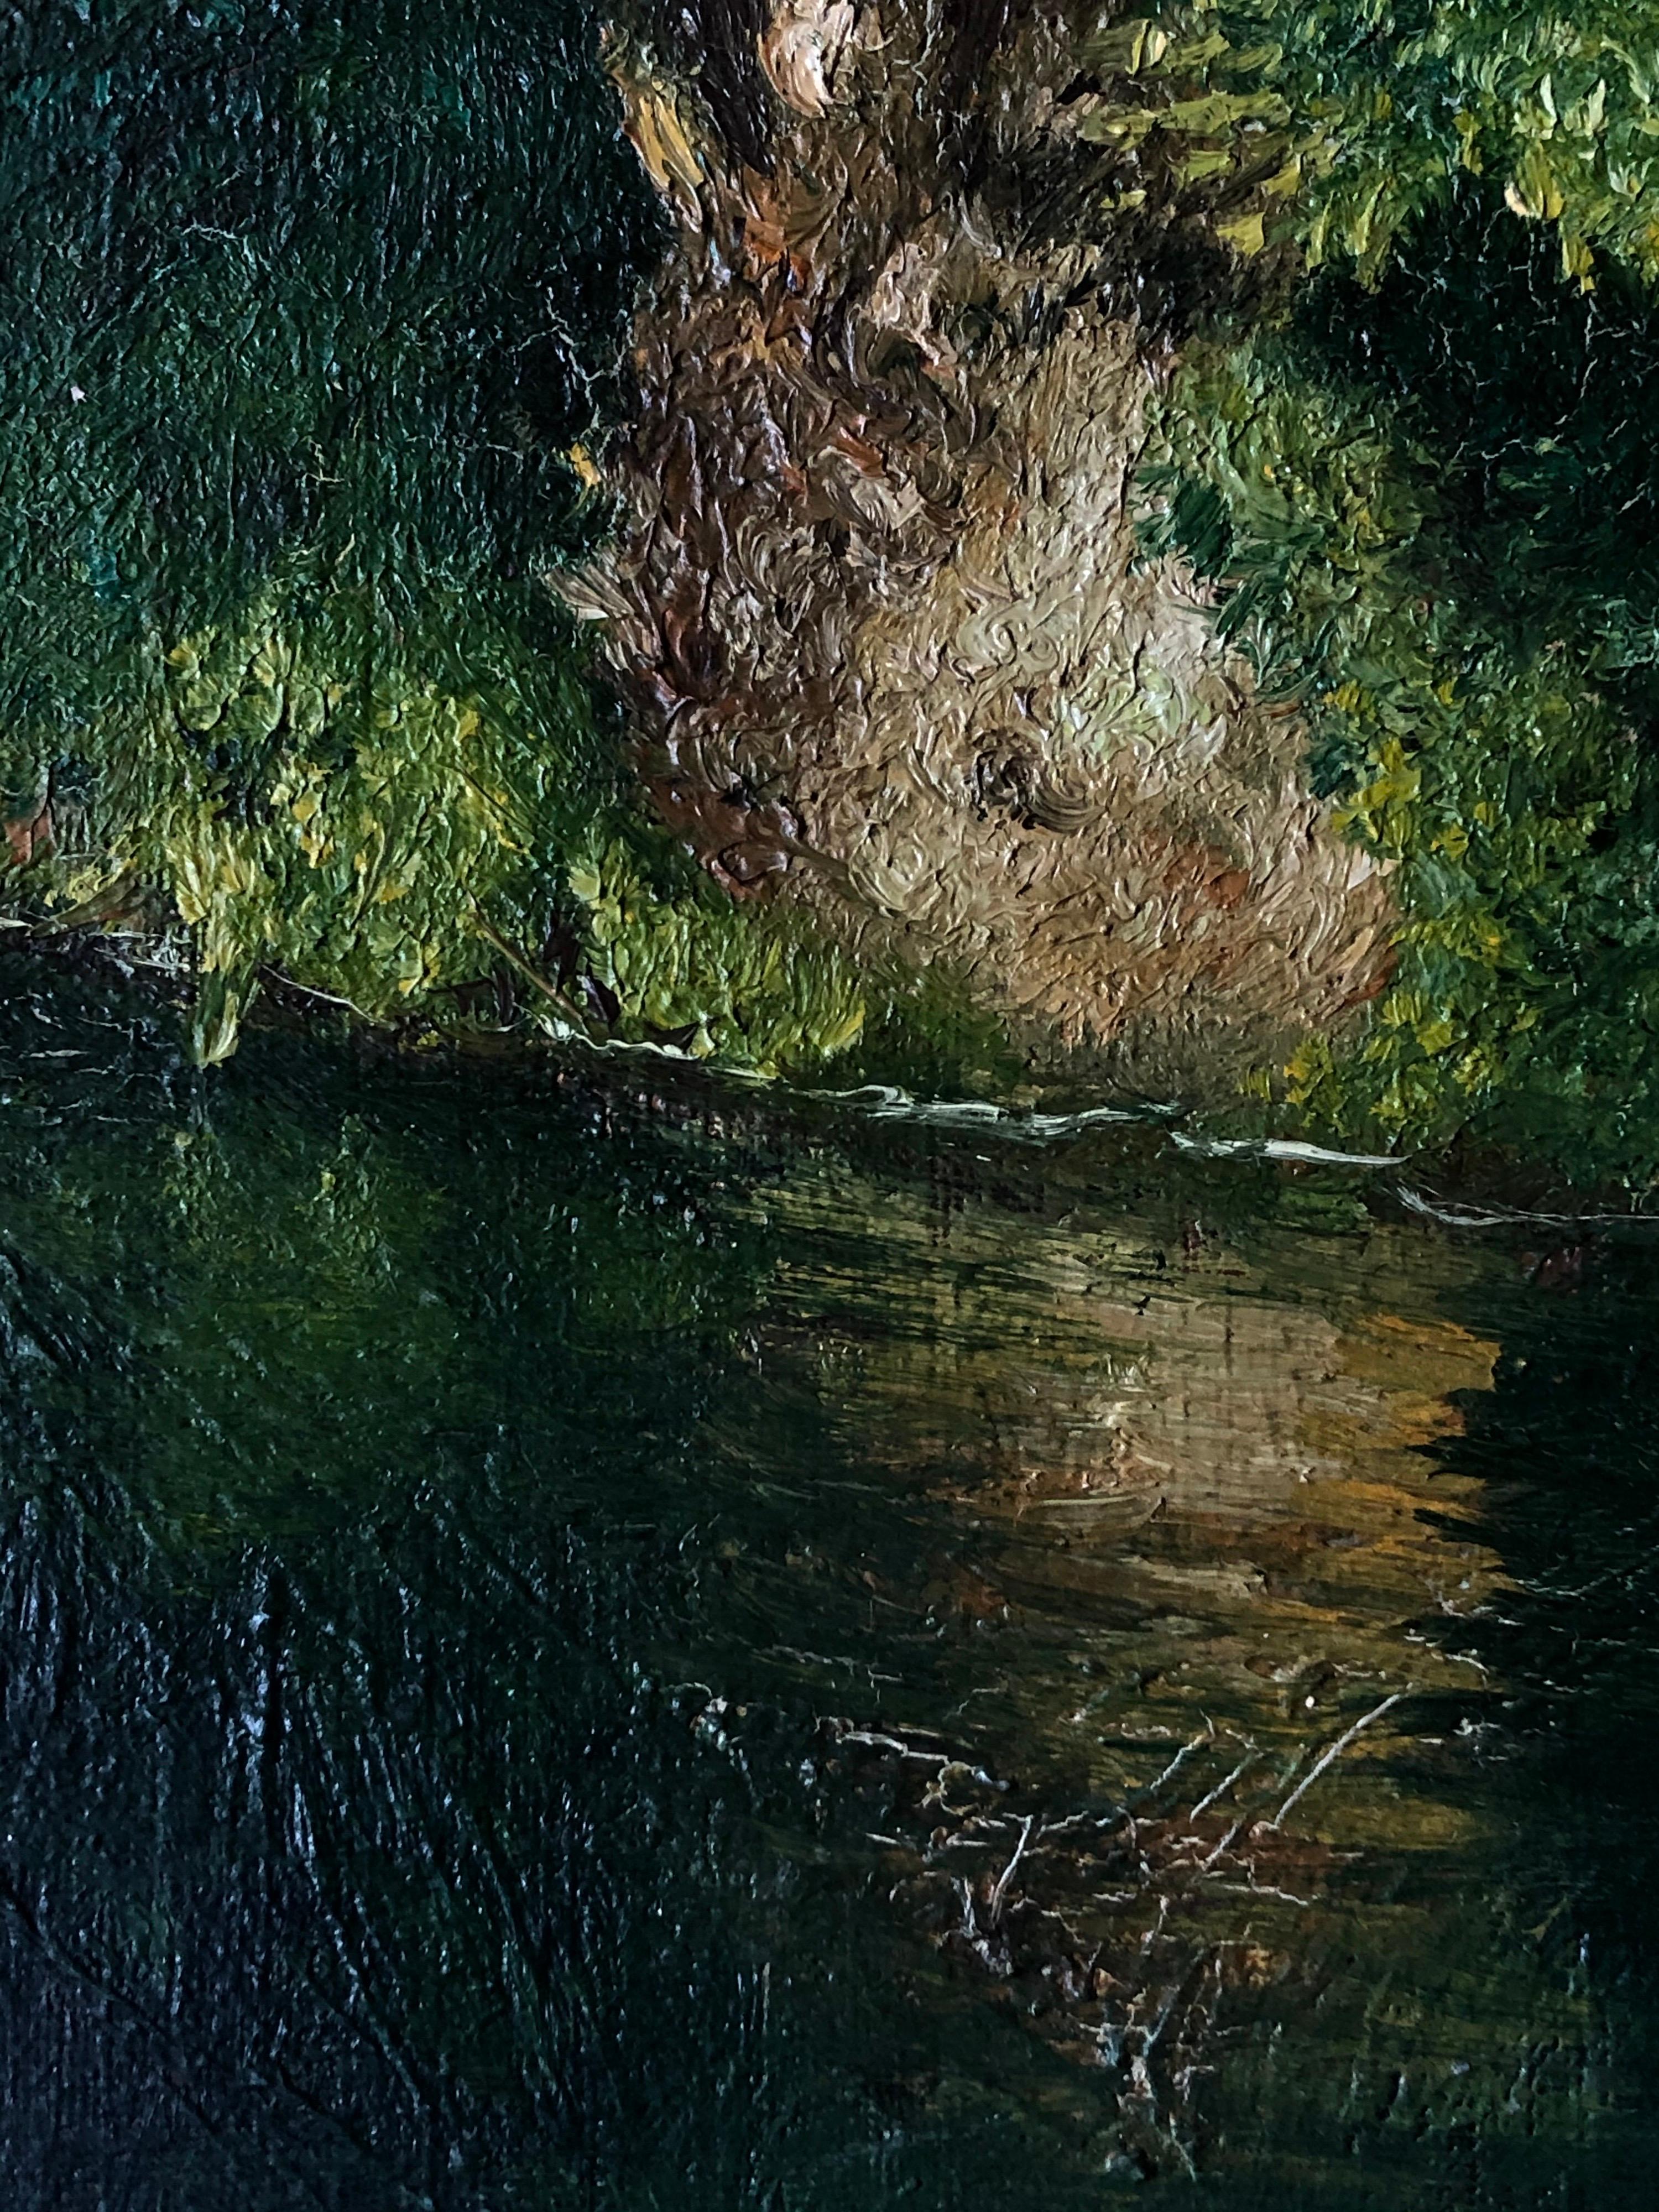 Mid 20th Century French Impasto Oil Painting on Canvas Dappled Light River 1